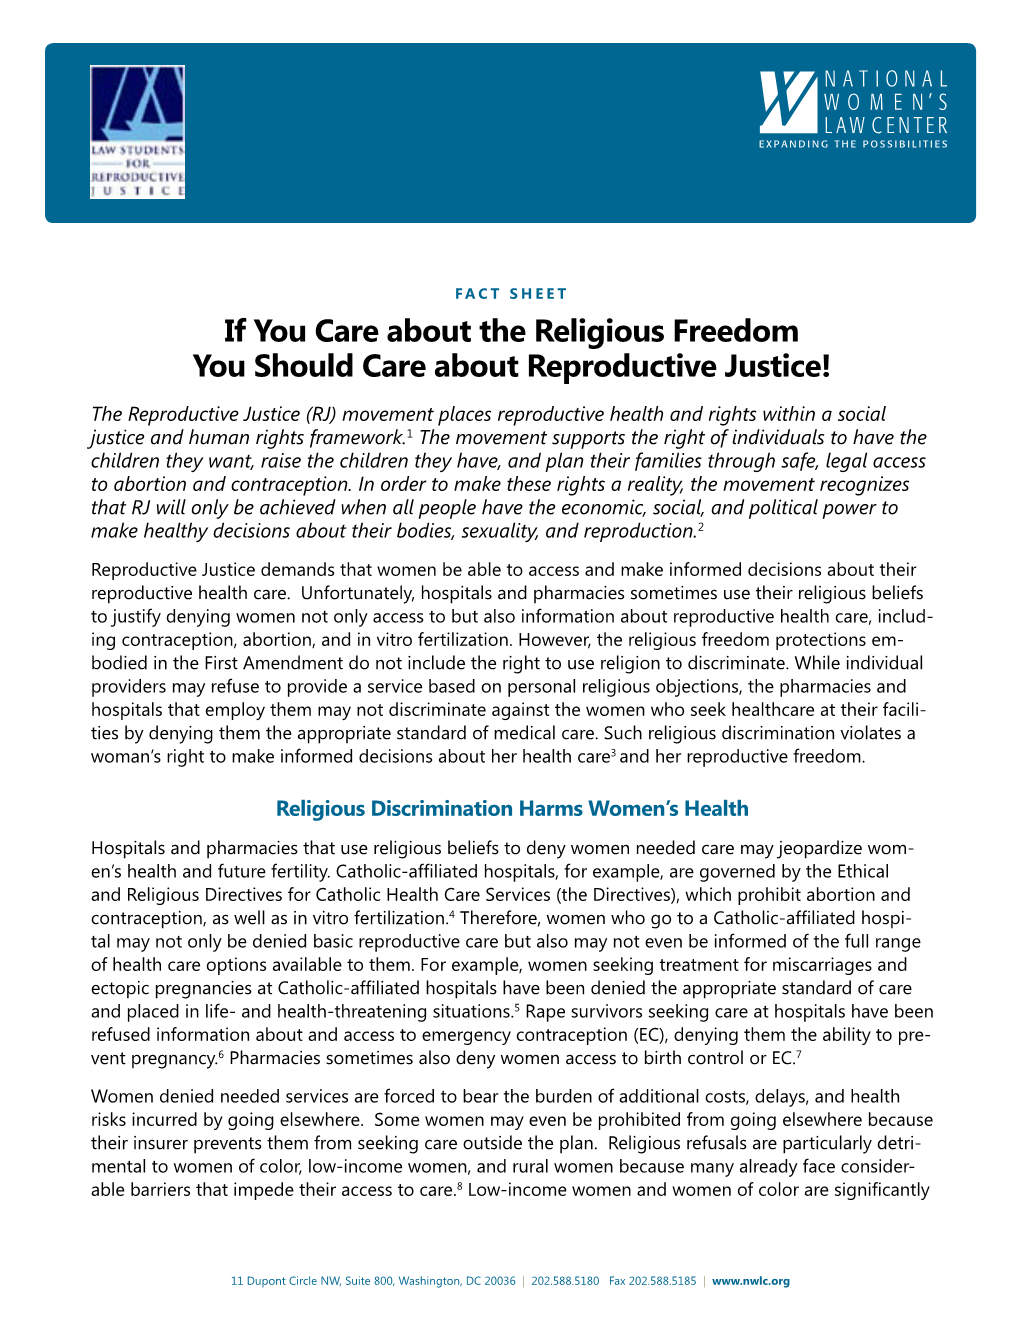 RELIGIOUS FREEDOM,You Should Care About Reproductive Justice • FACT SHEET